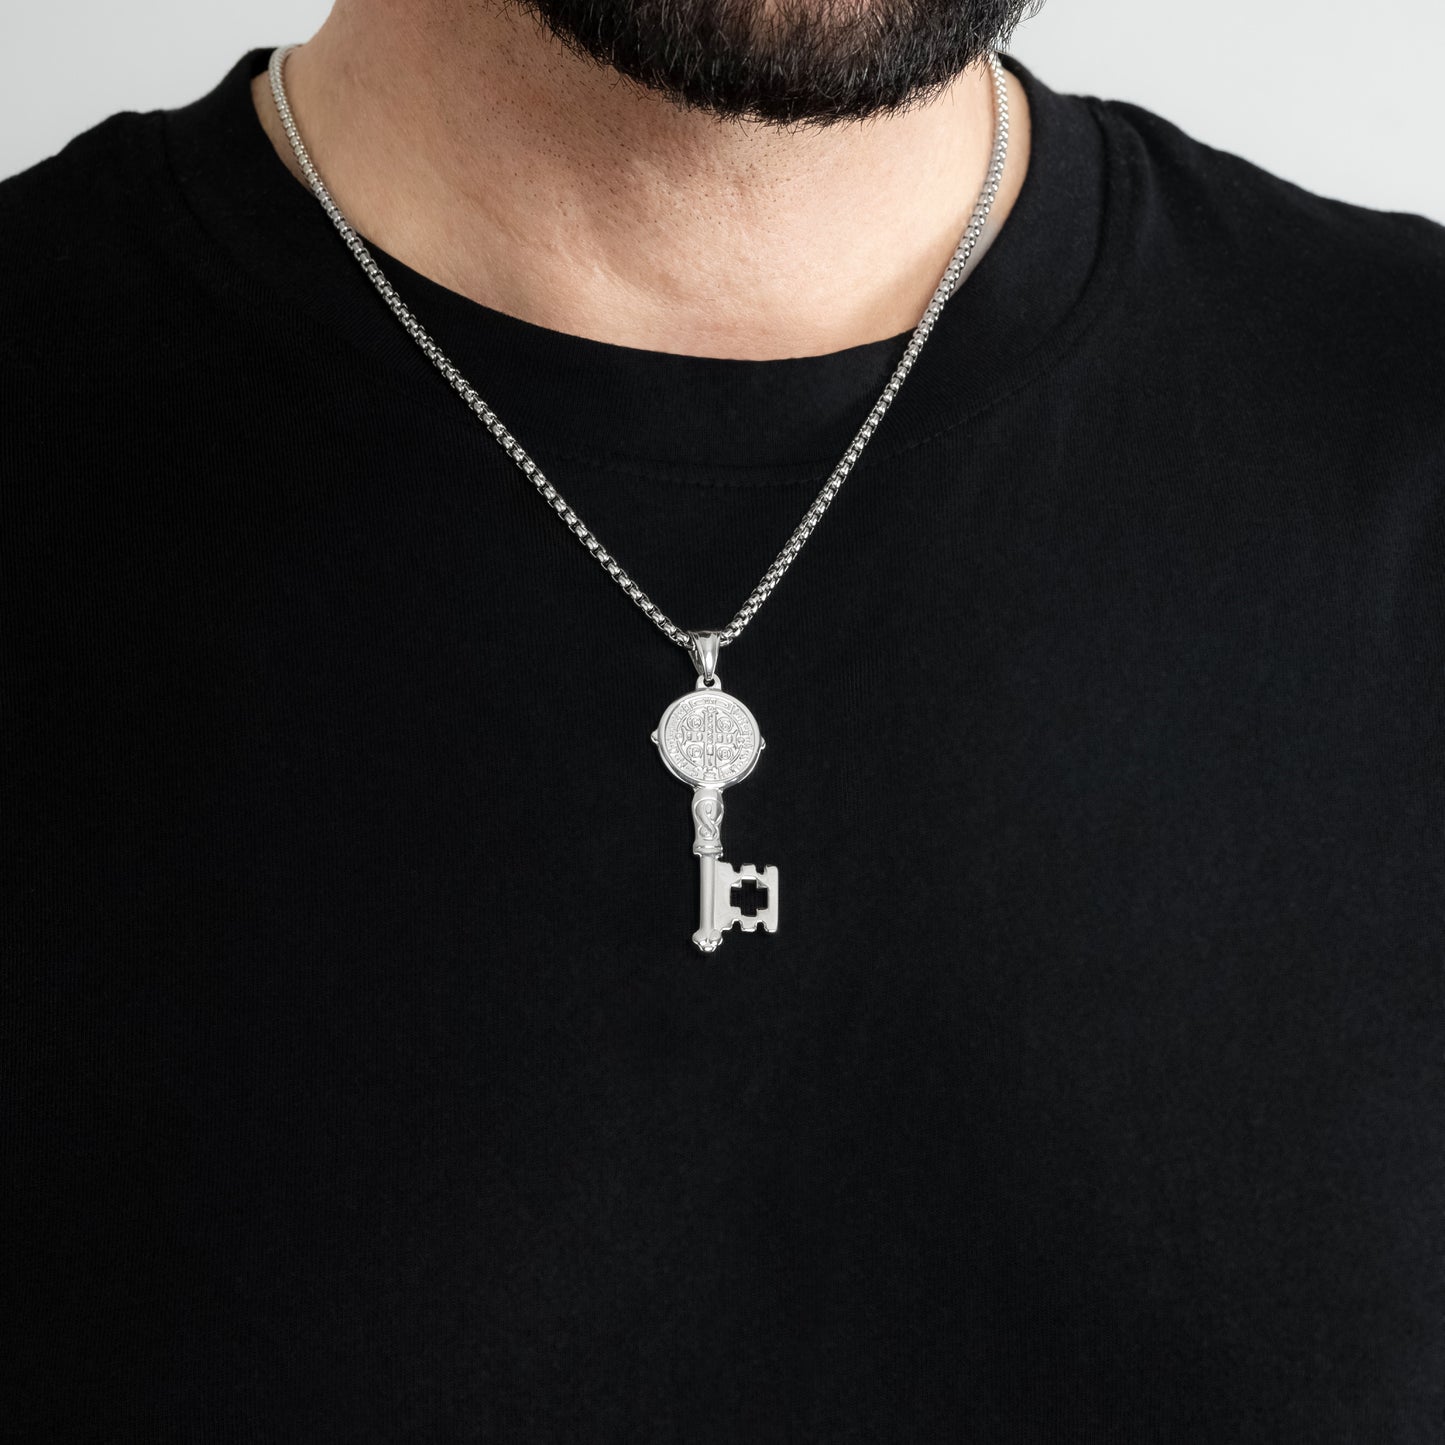 A male model in a black t-shirt wearing a St. Benedict Key Silver Pendant with a 3mm Silver Round Box link chain 22 inches. Close-up image of the non-tarnish meaningful men's necklace.